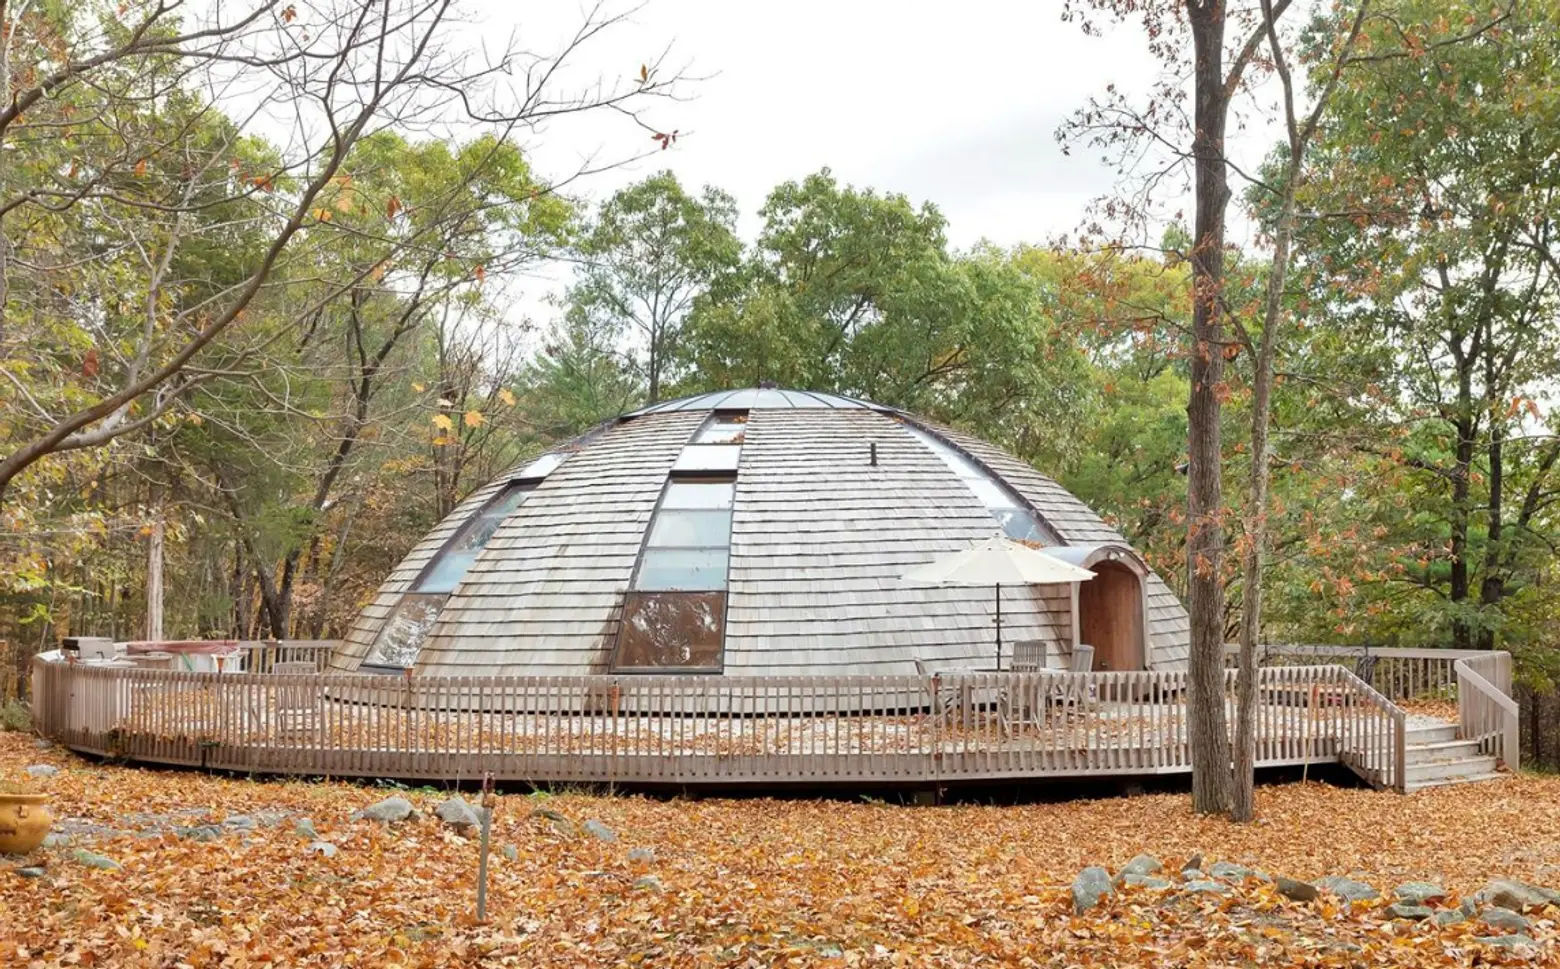 Why Can’t This Rotating Dome Home Find a Buyer?; Wi-Fi Hot Spots Take Shape